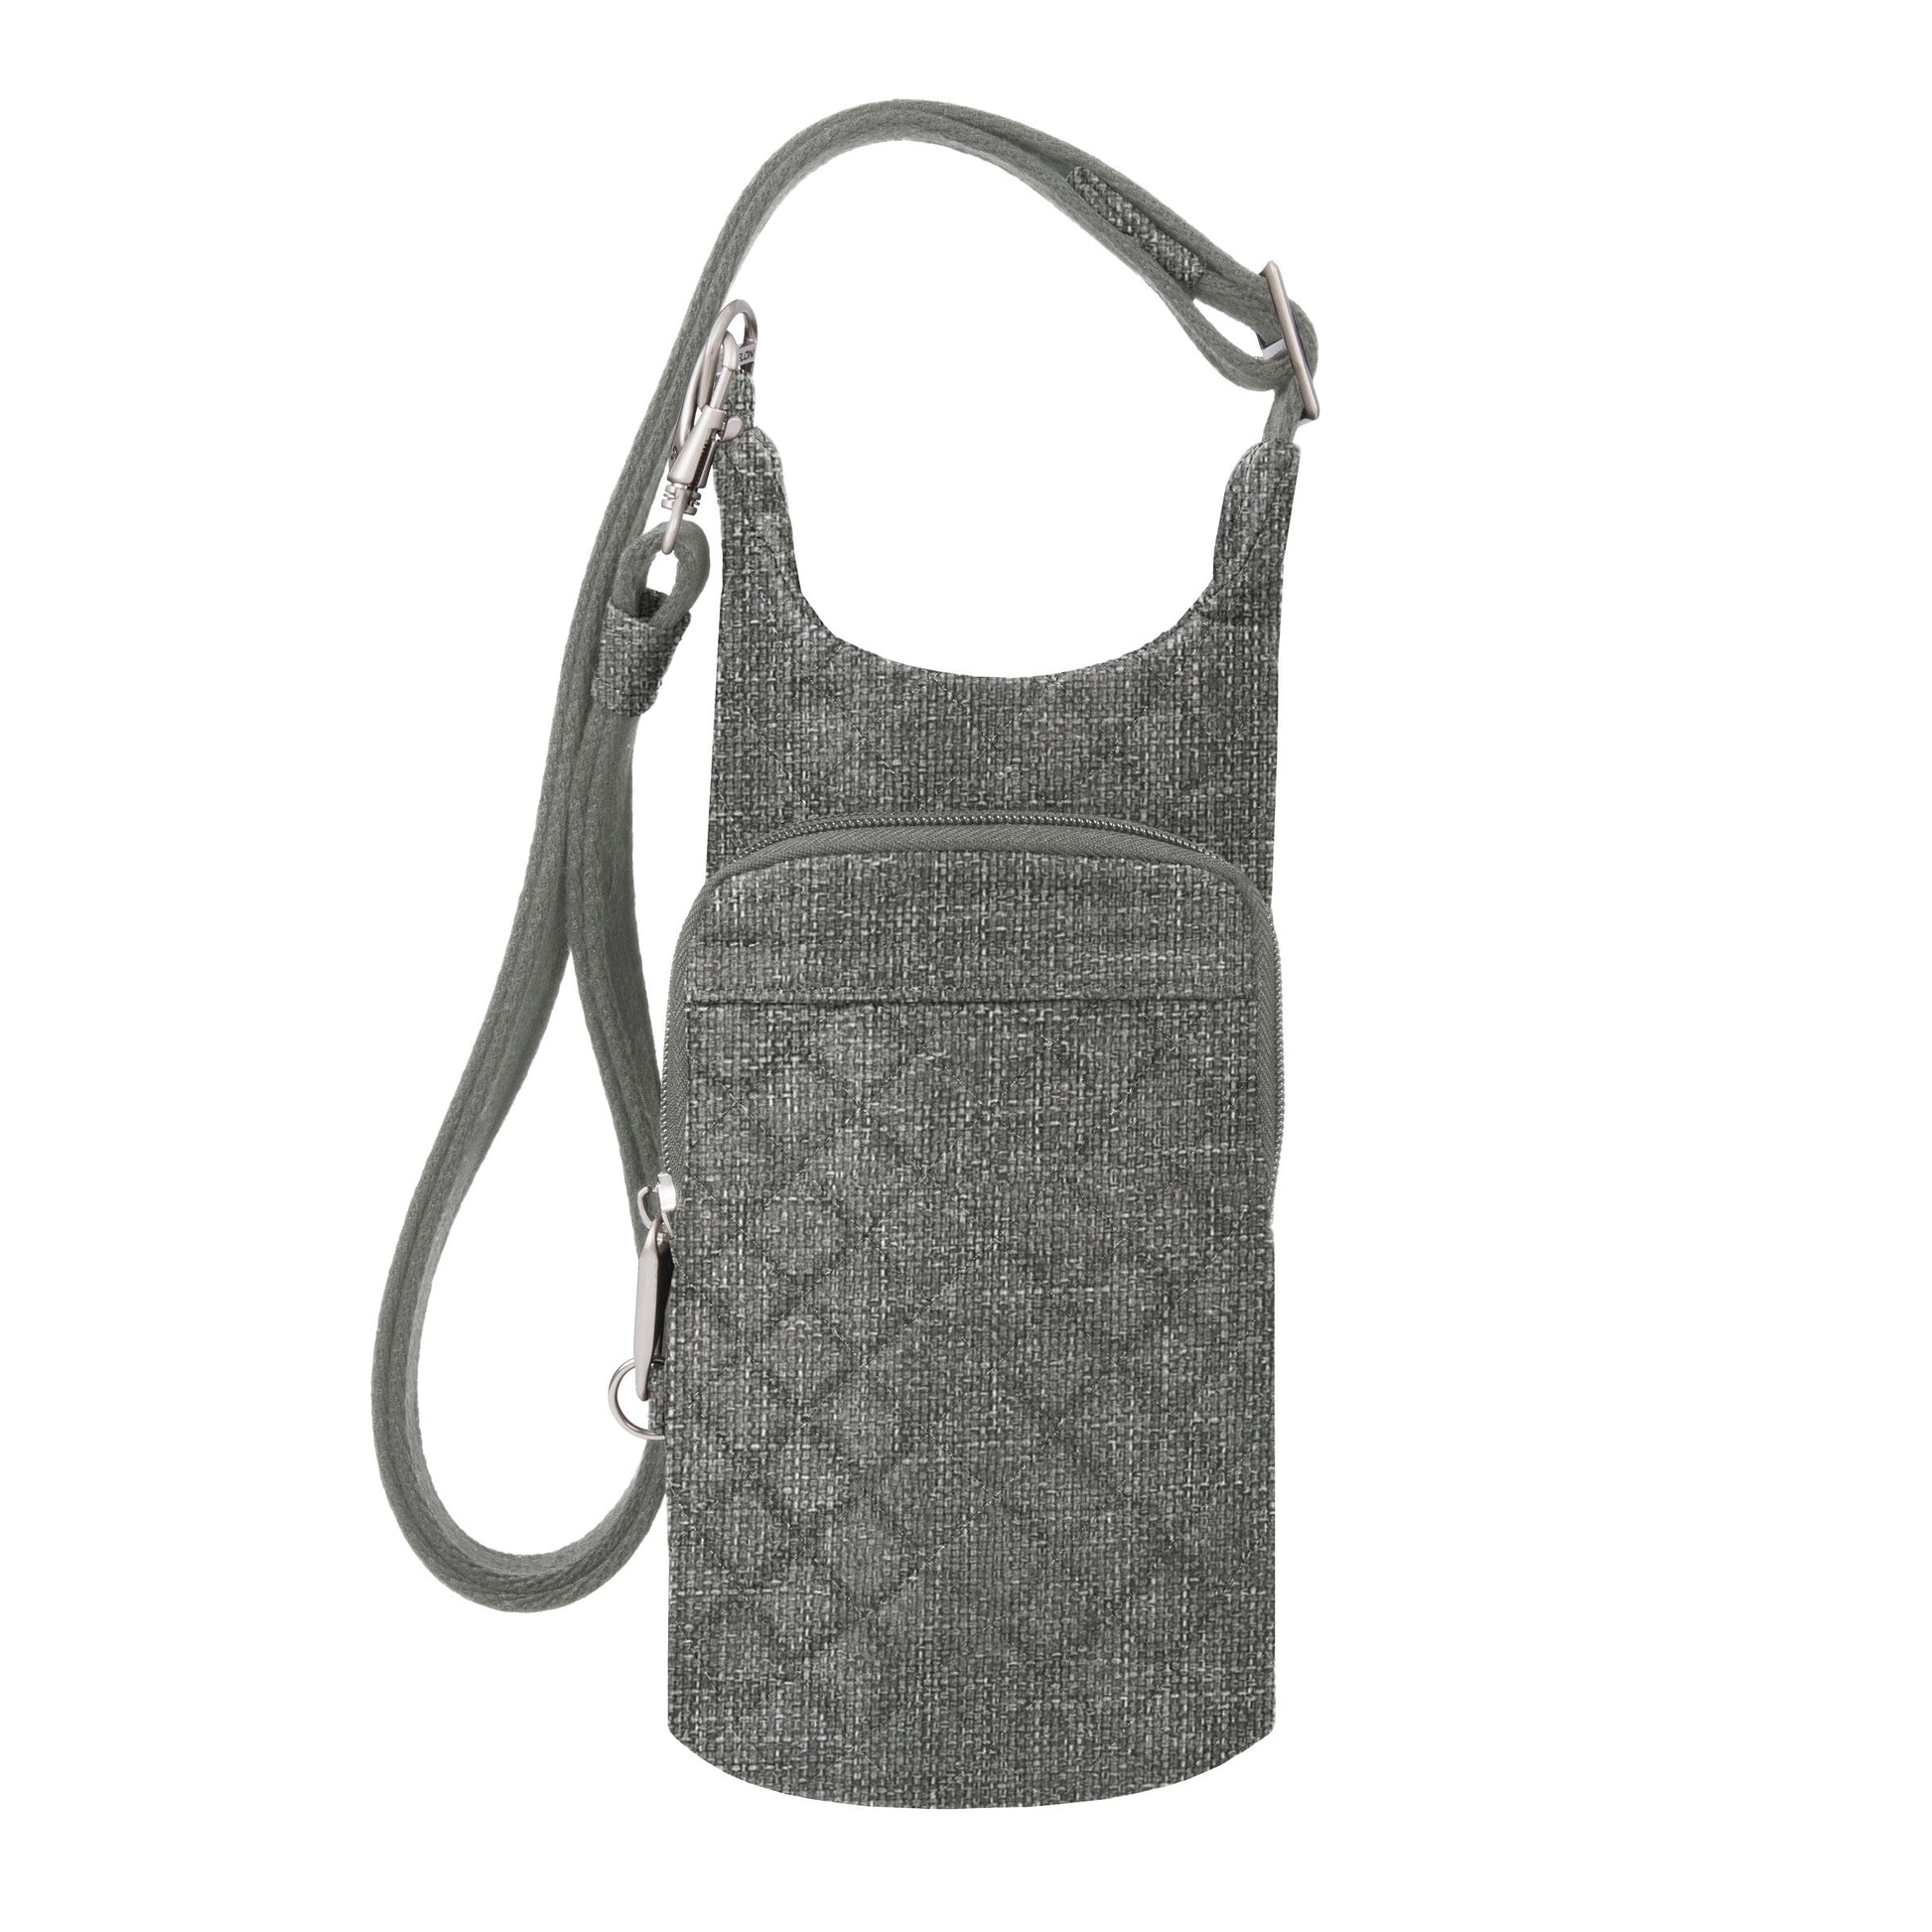 Travelon Anti-Theft Boho Insulated Water Bottle Tote - Gray Heather